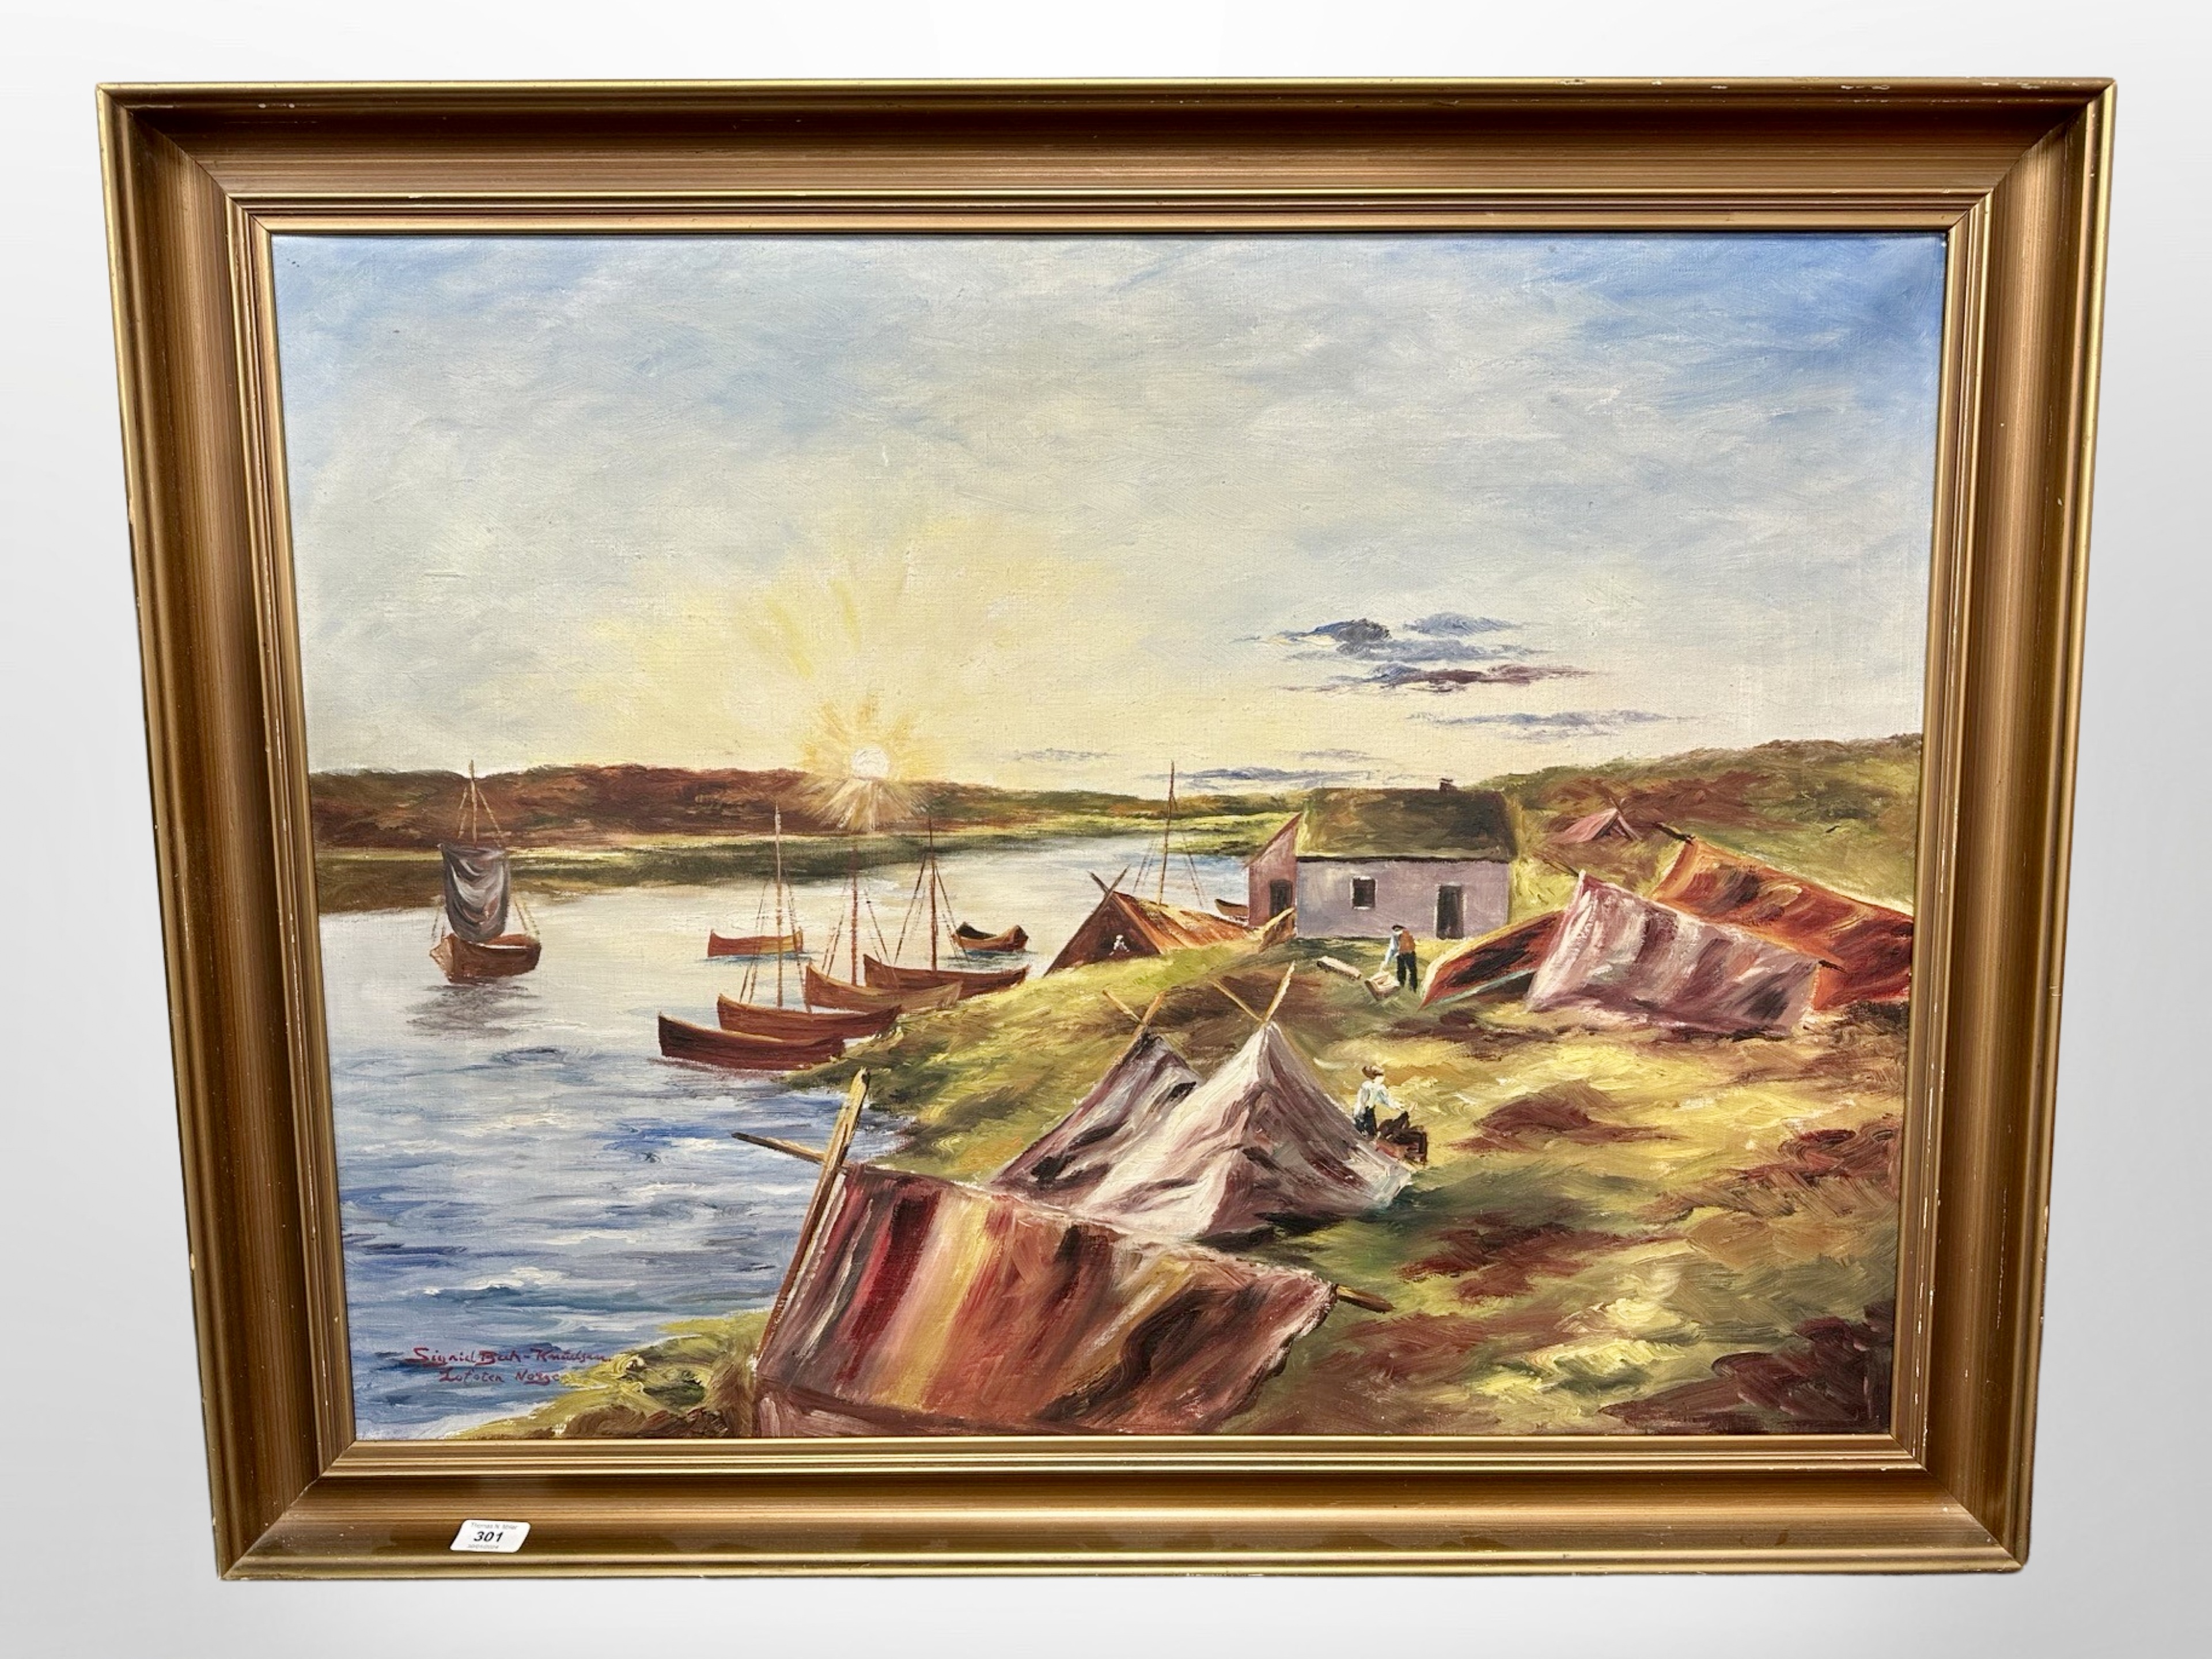 Danish School : Boats on a river at sunset, oil on canvas, 86cm x 65cm.